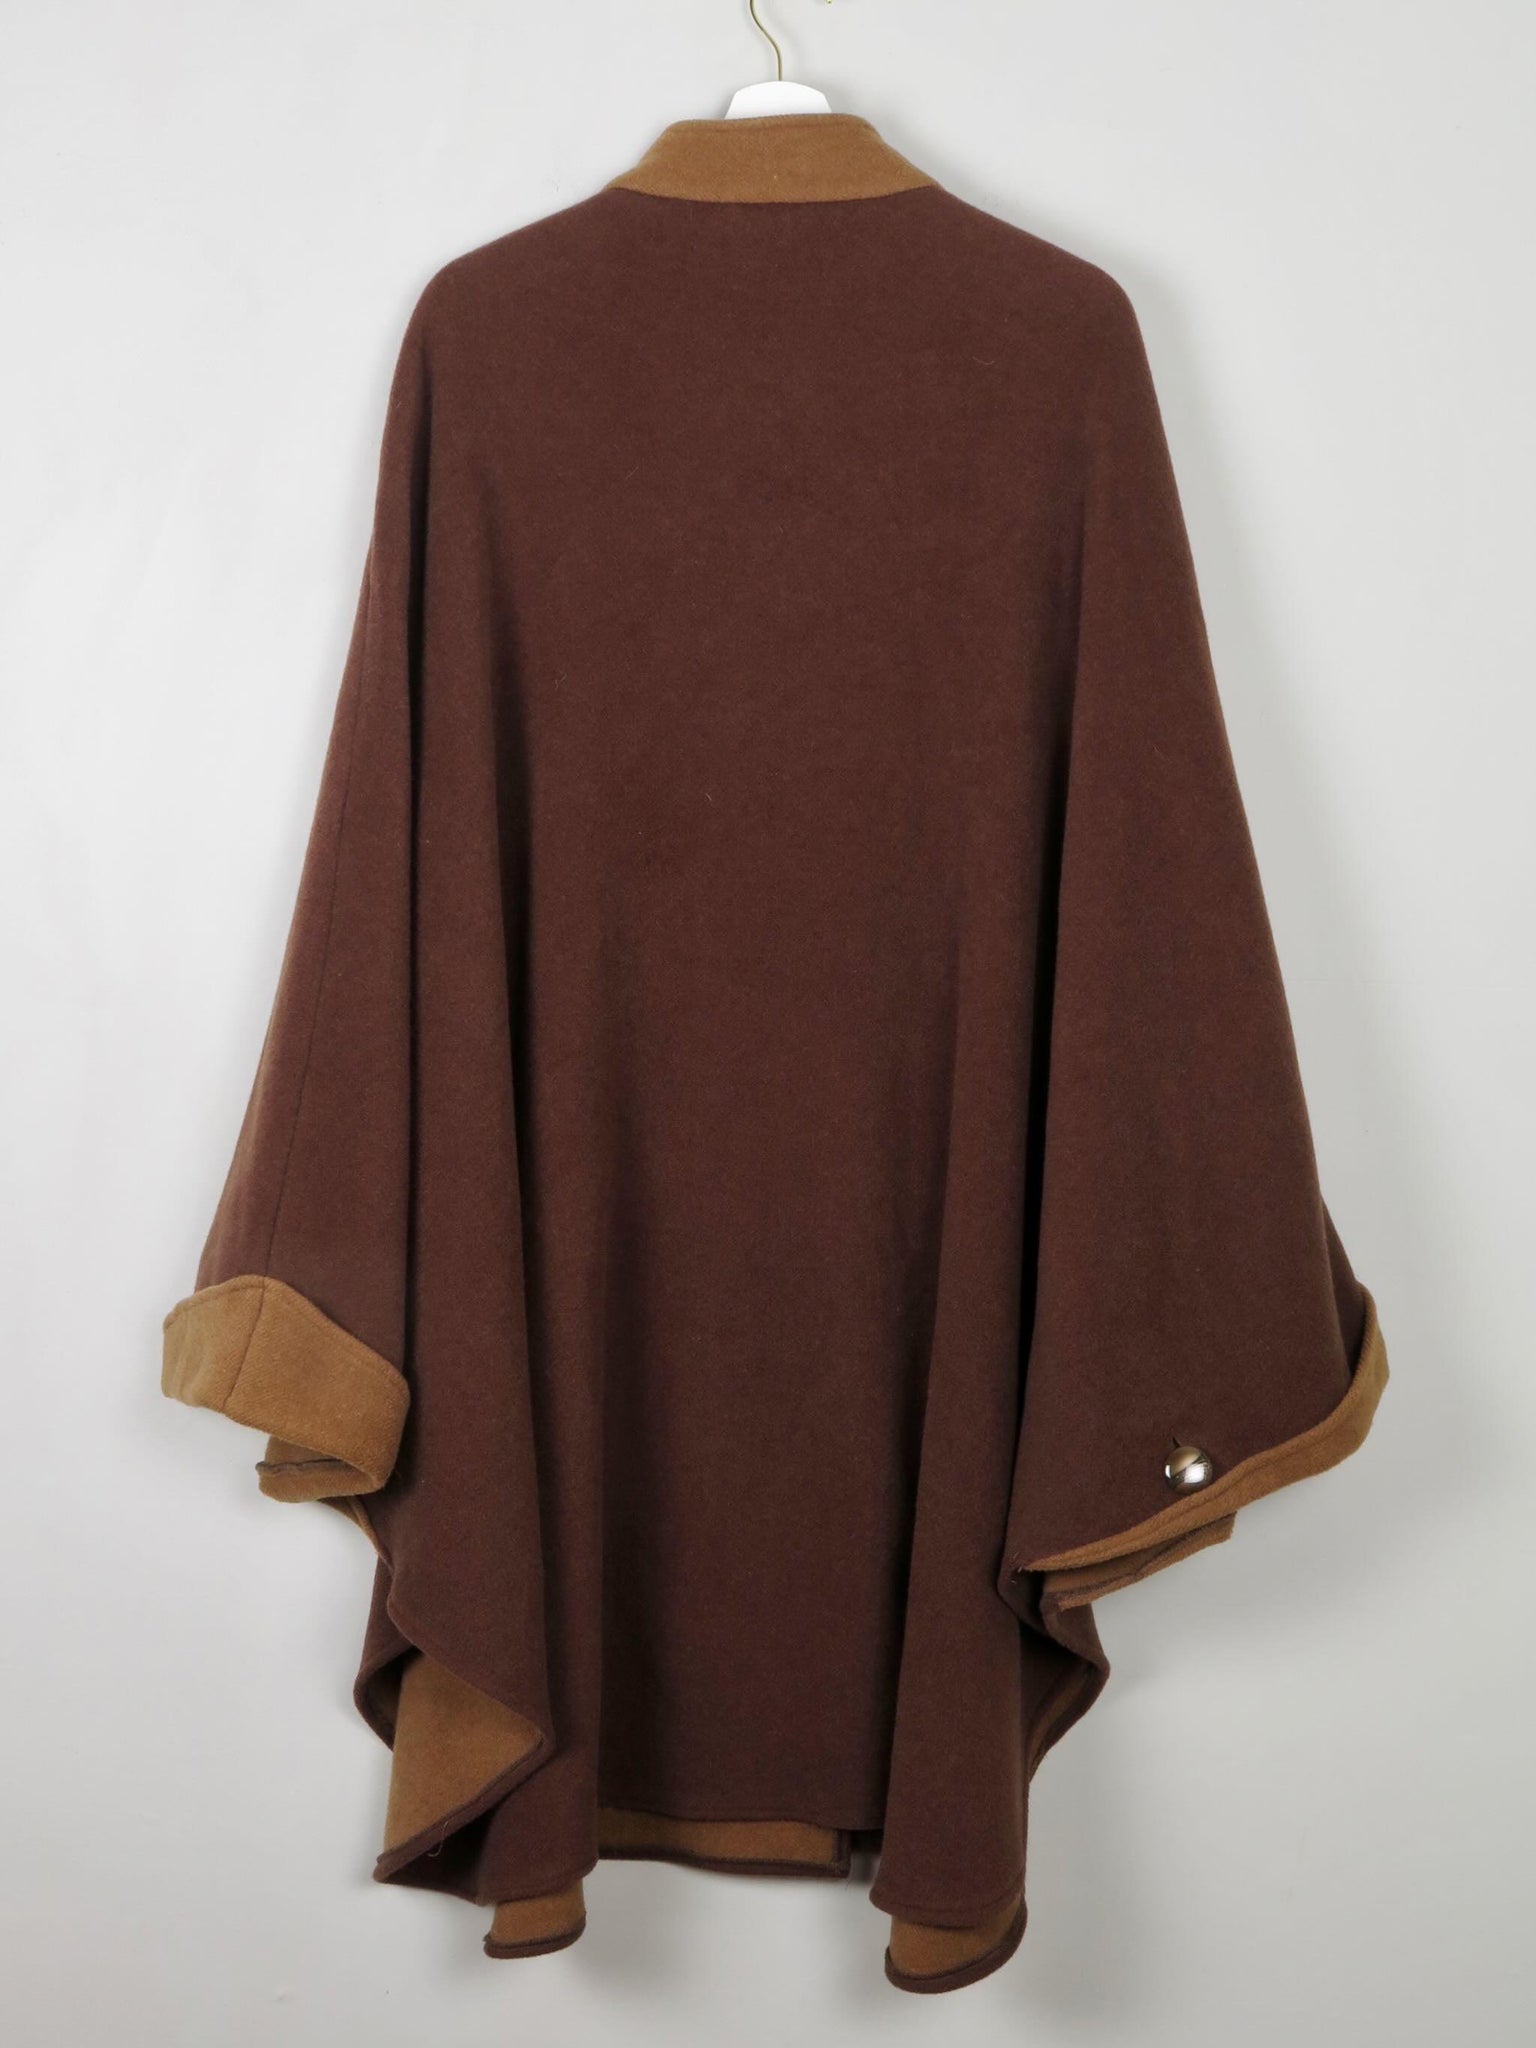 Women's Vintage Brown Wool Cape M-XL - The Harlequin